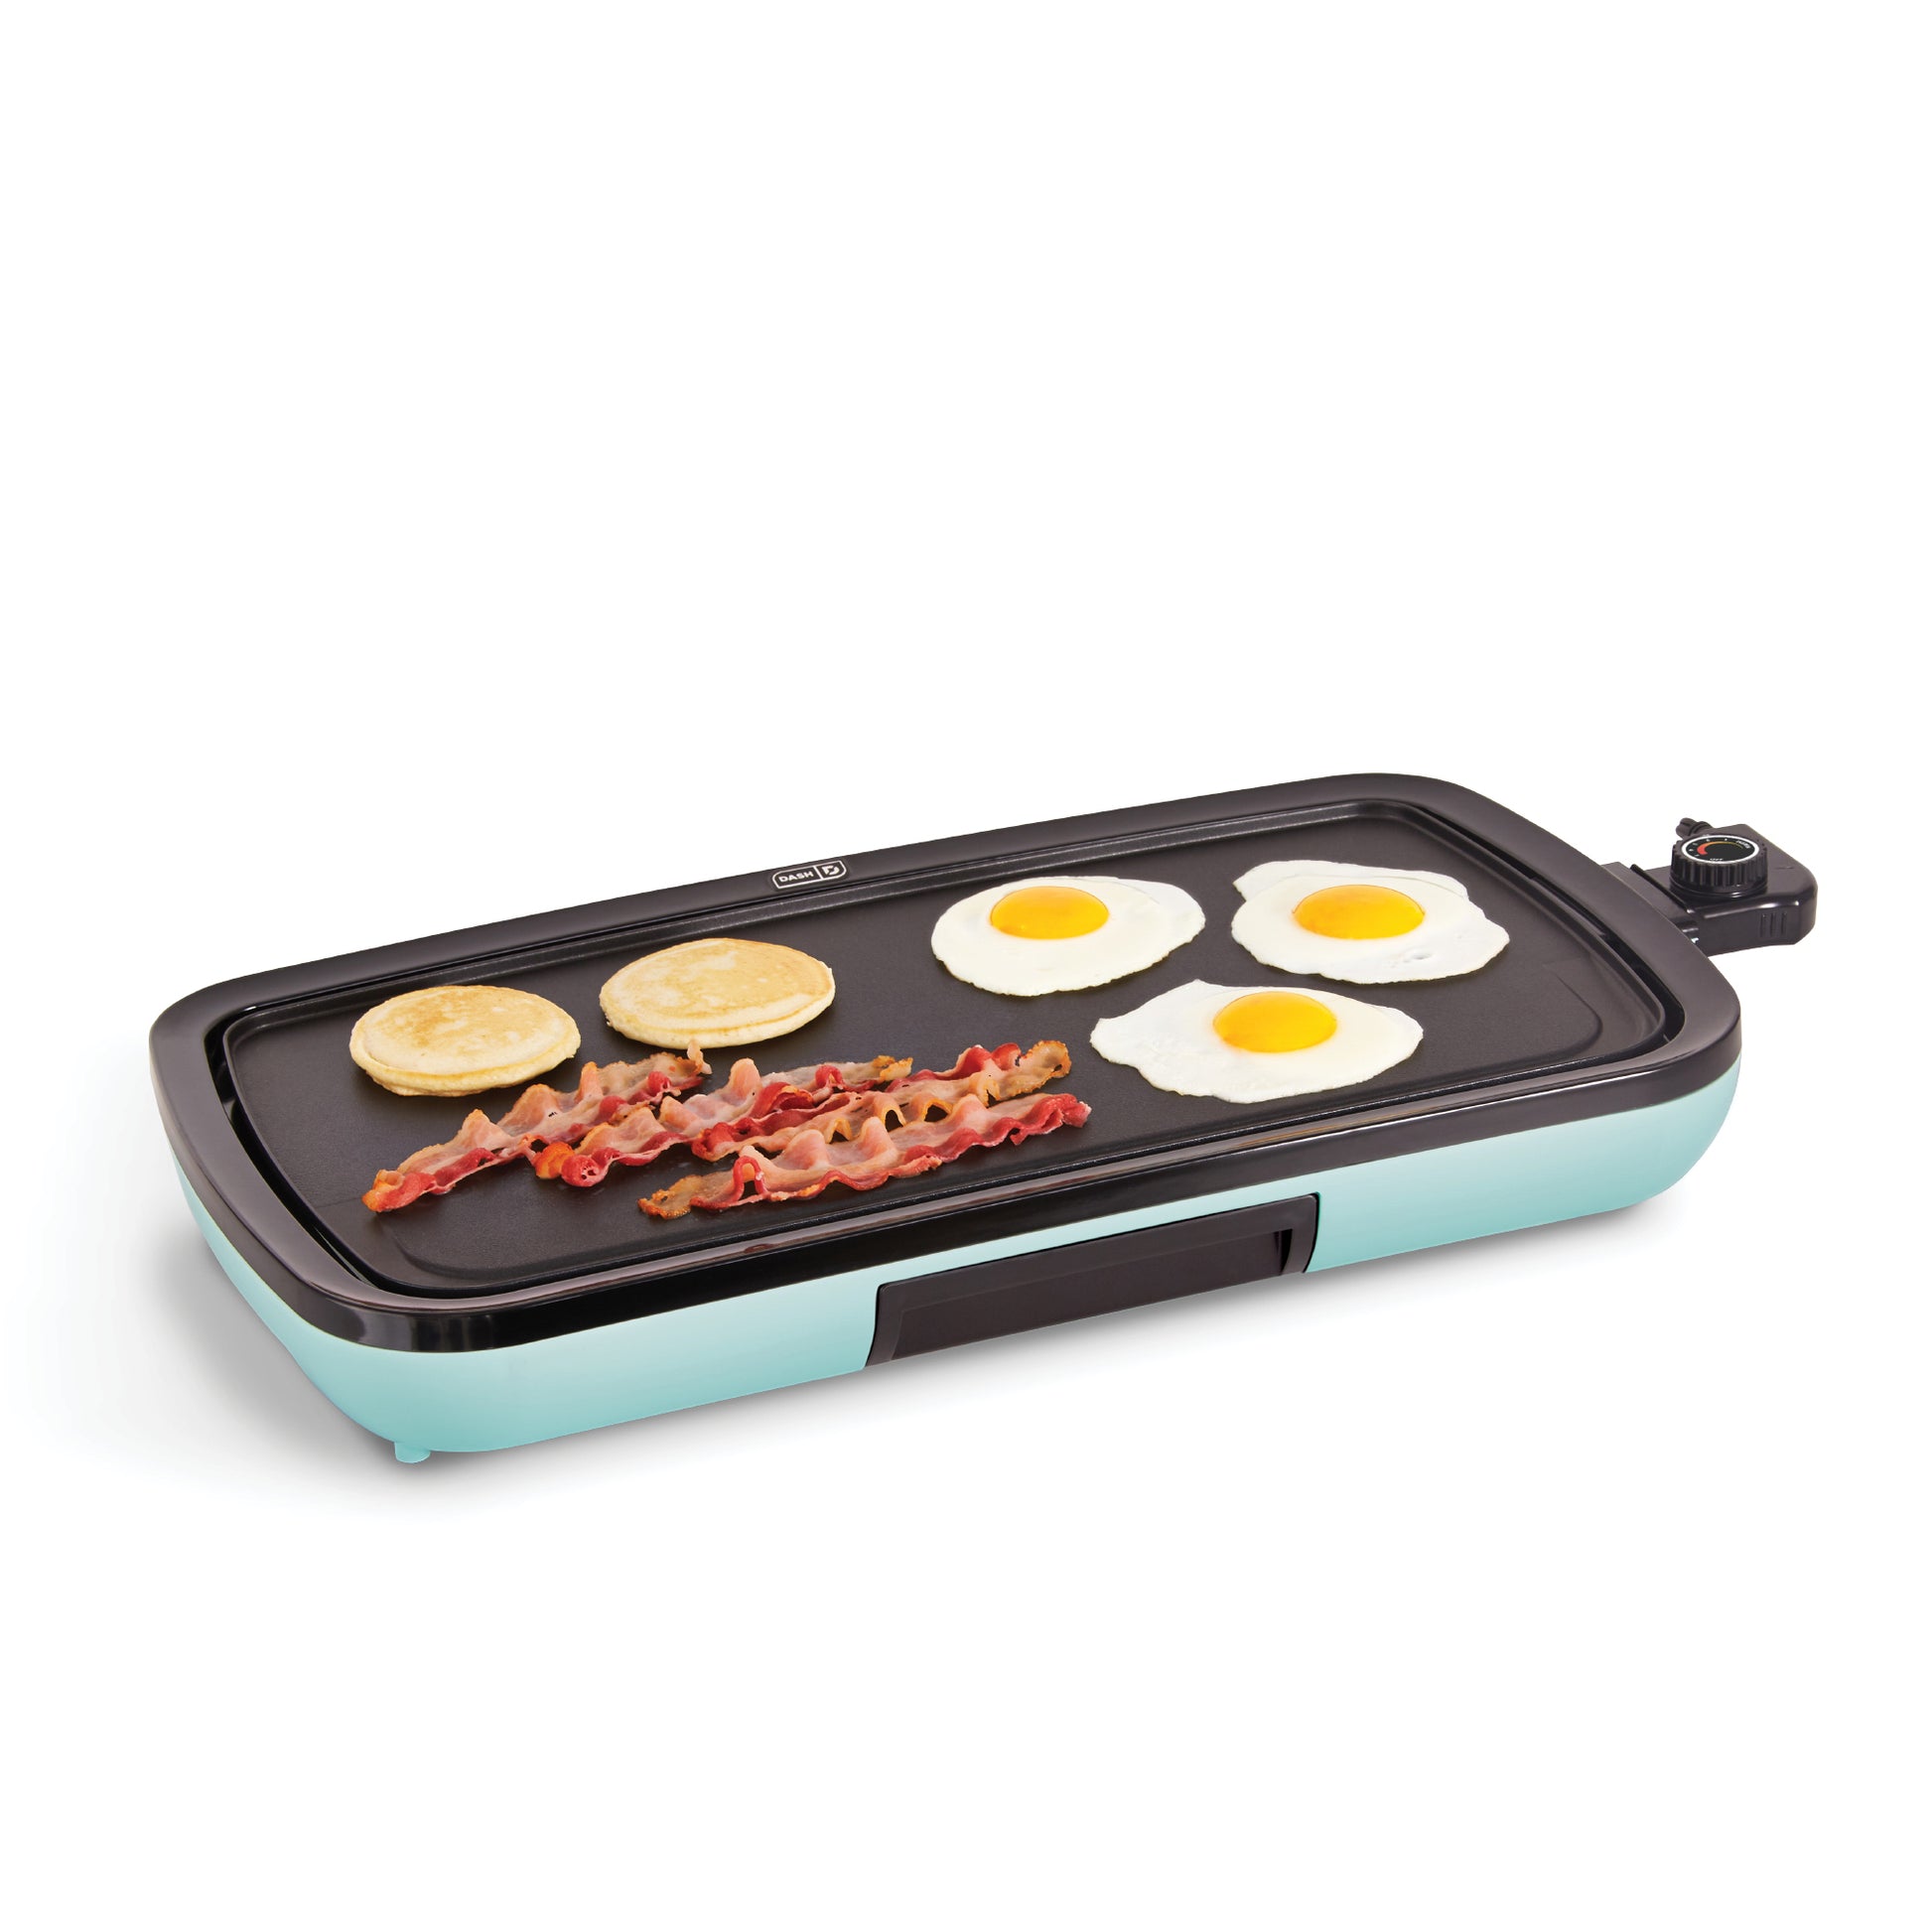 Low Power Electric Cooking: Dash Mini Maker Griddle Test - Cheap